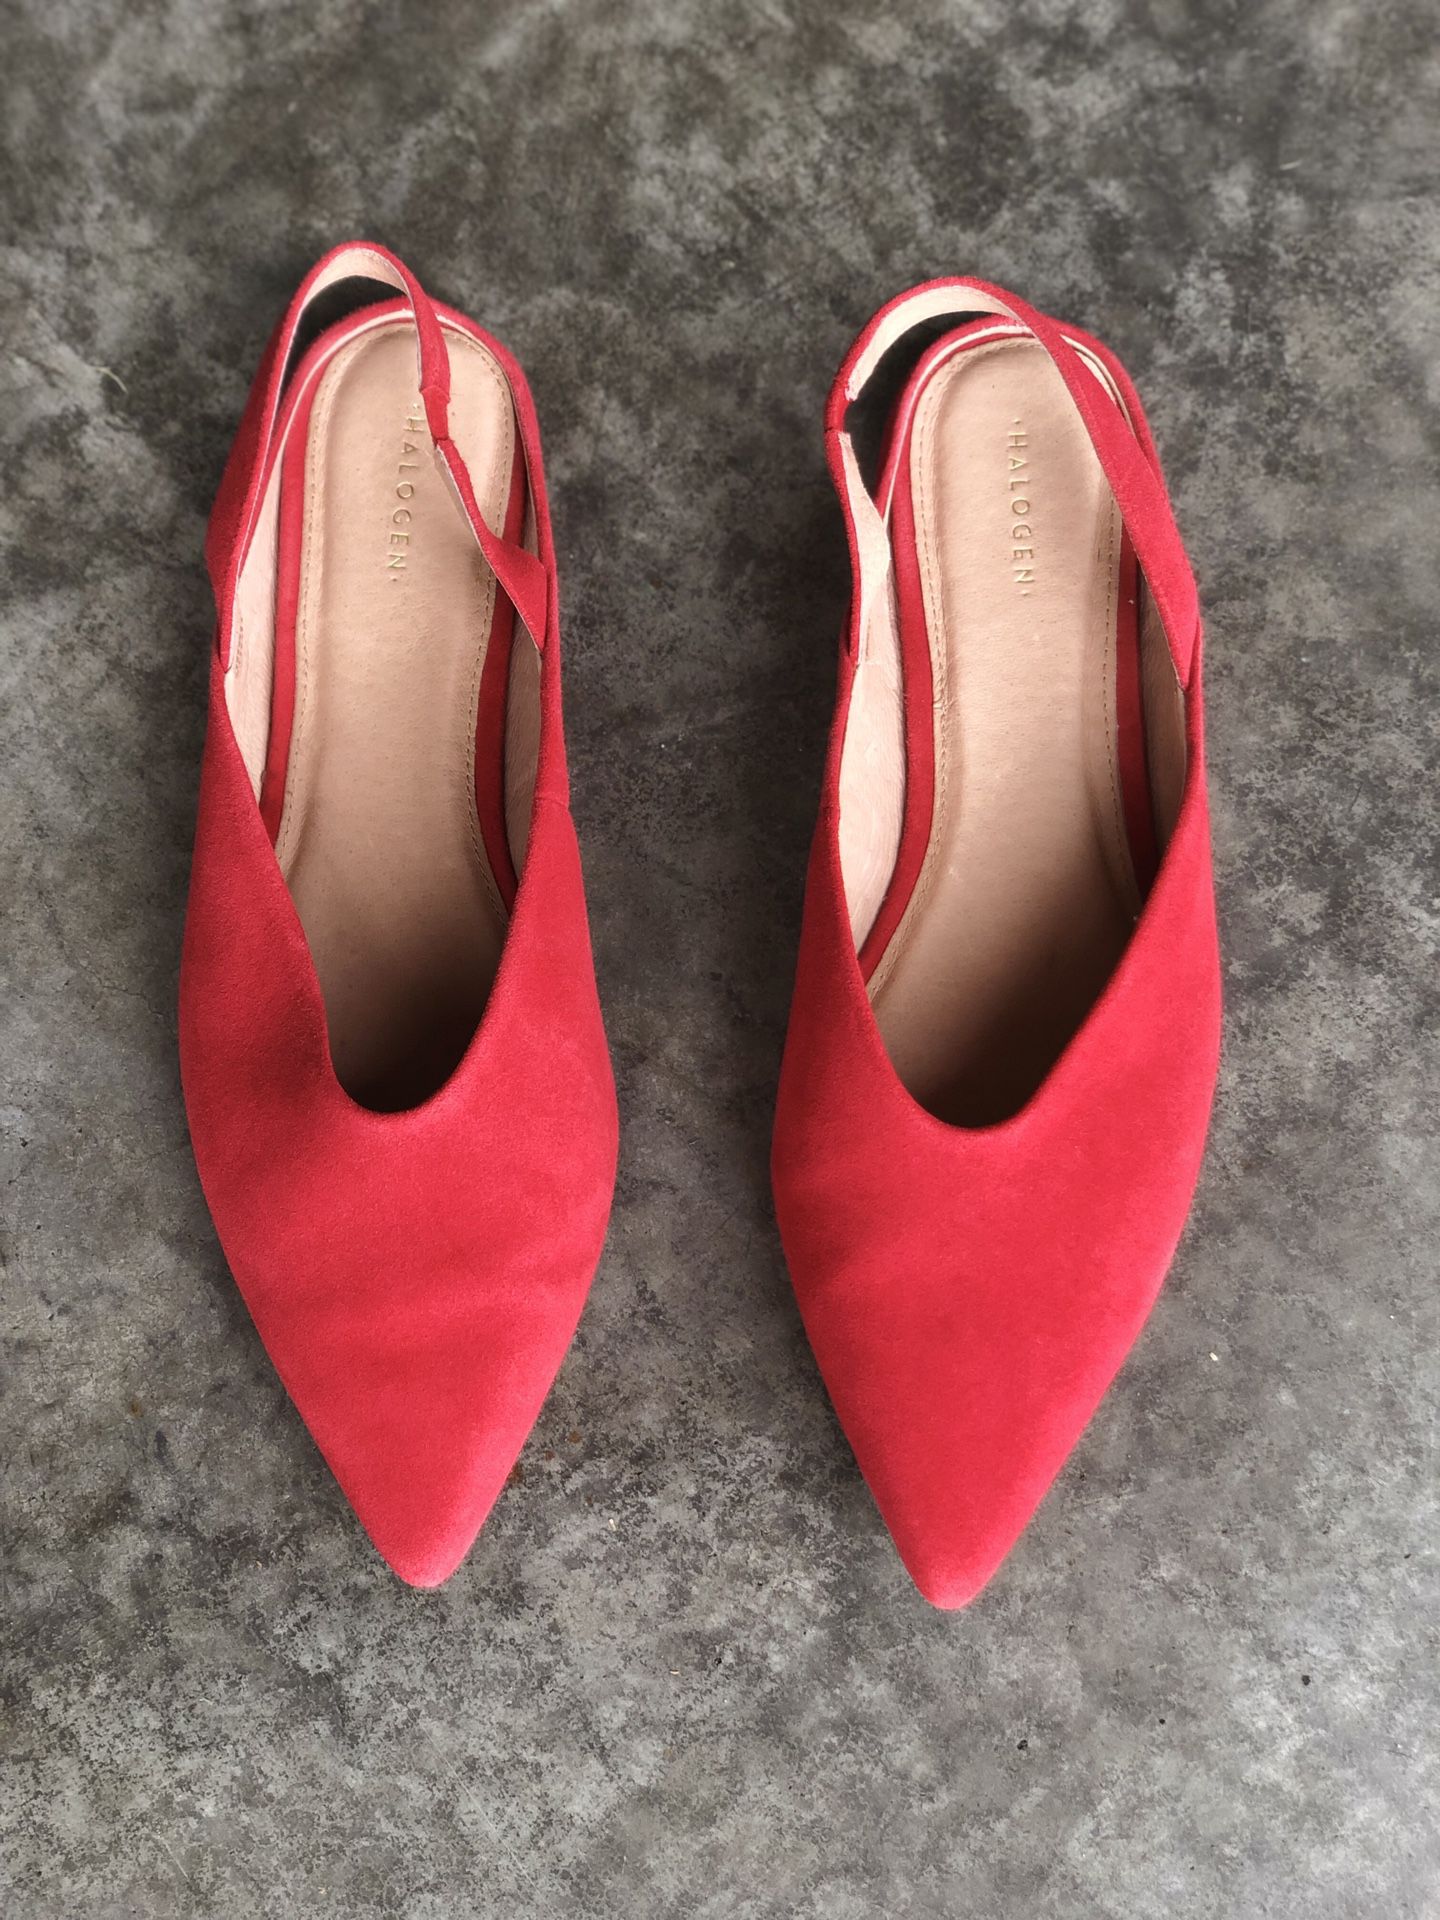 Halogen Red Slingback Suede Flats (size 9.5) Retail $99